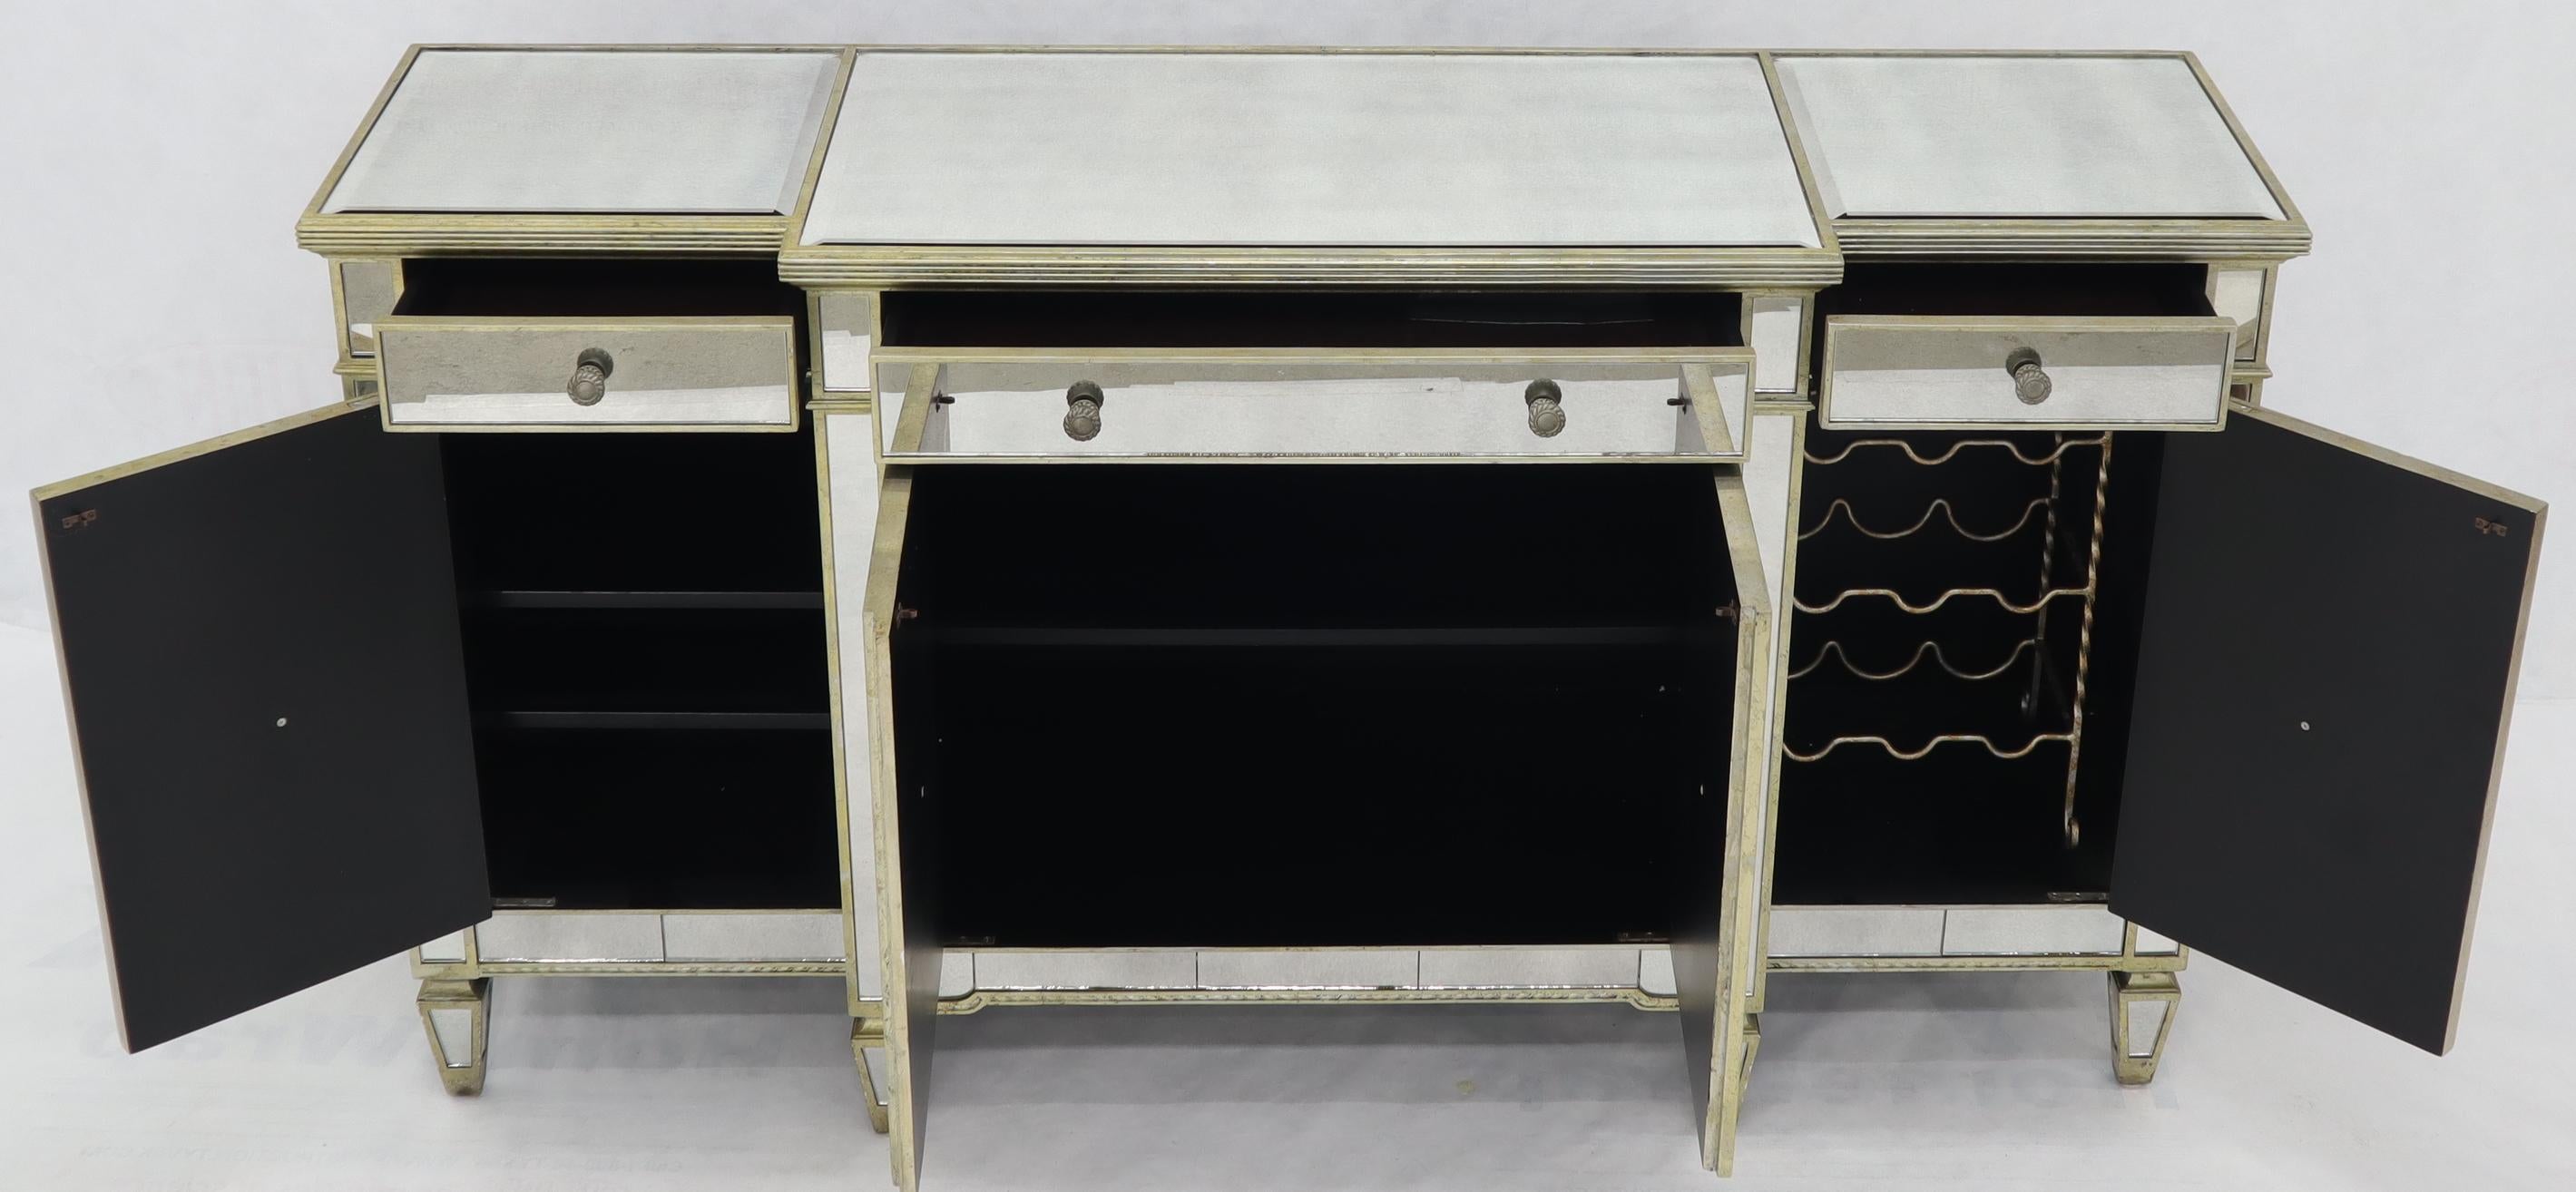 Mirrored Glass Sideboard Cabinet Credenza Console For Sale 2